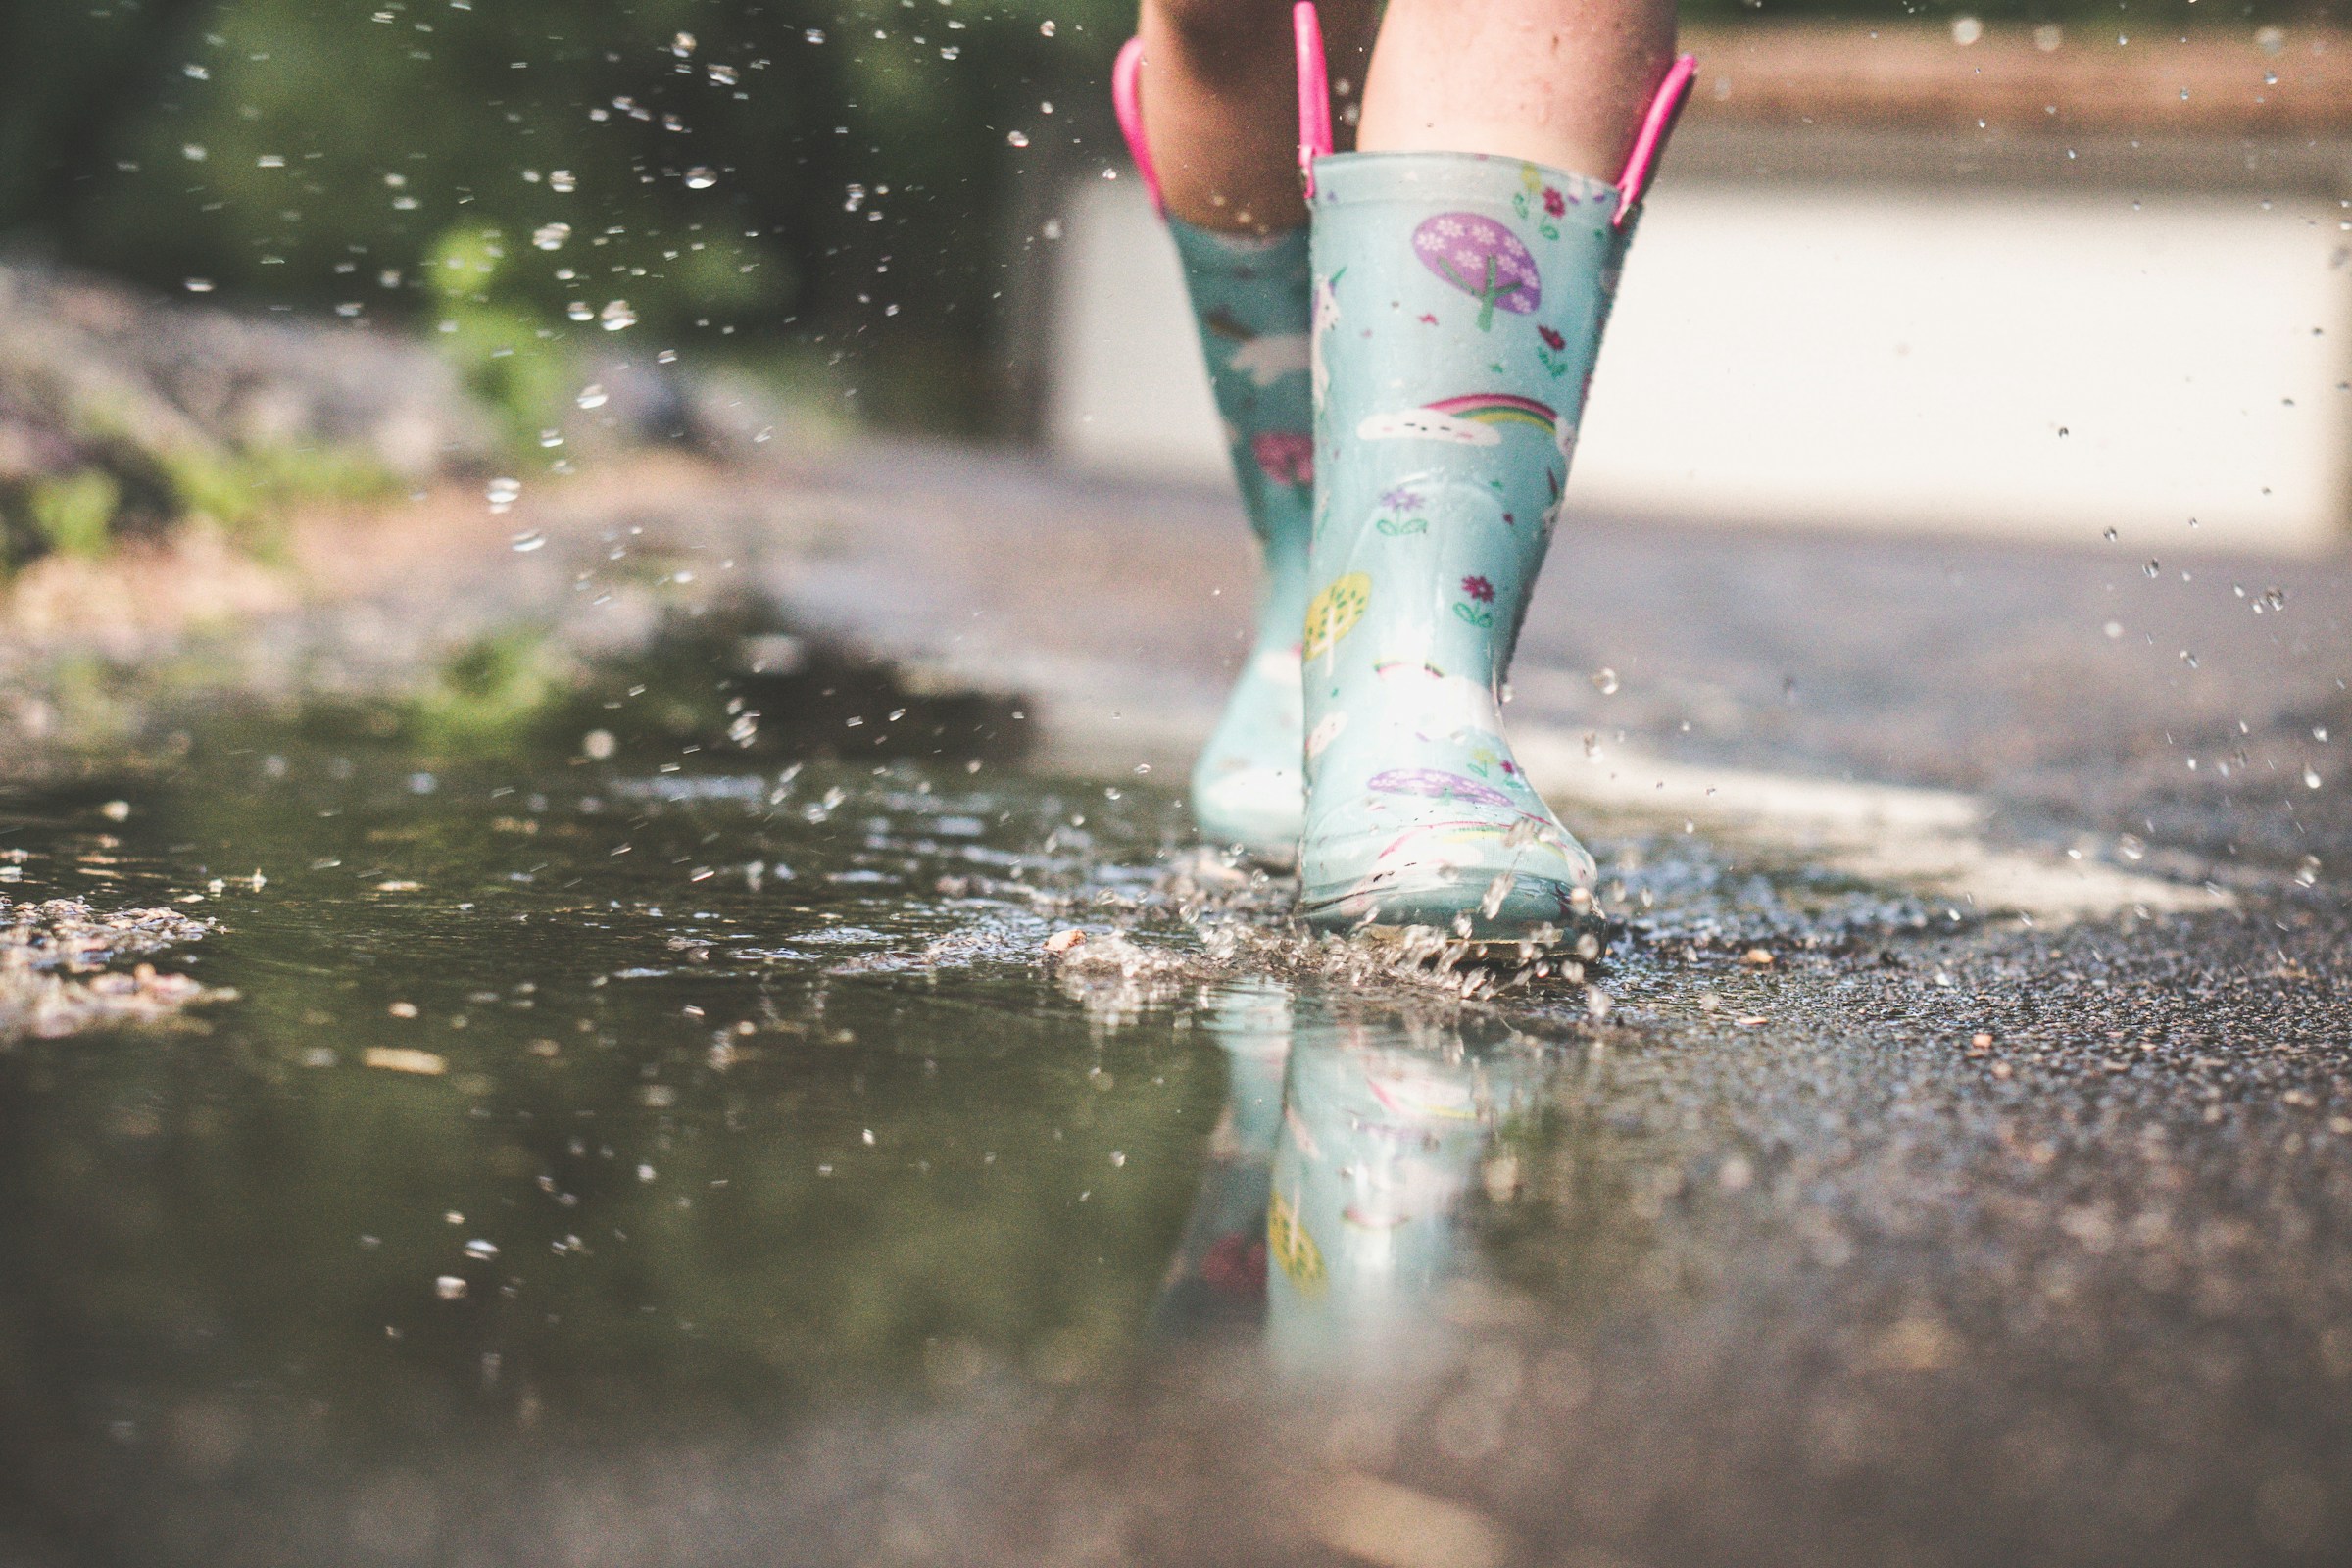 A child wearing wellie boots walking in a puddle